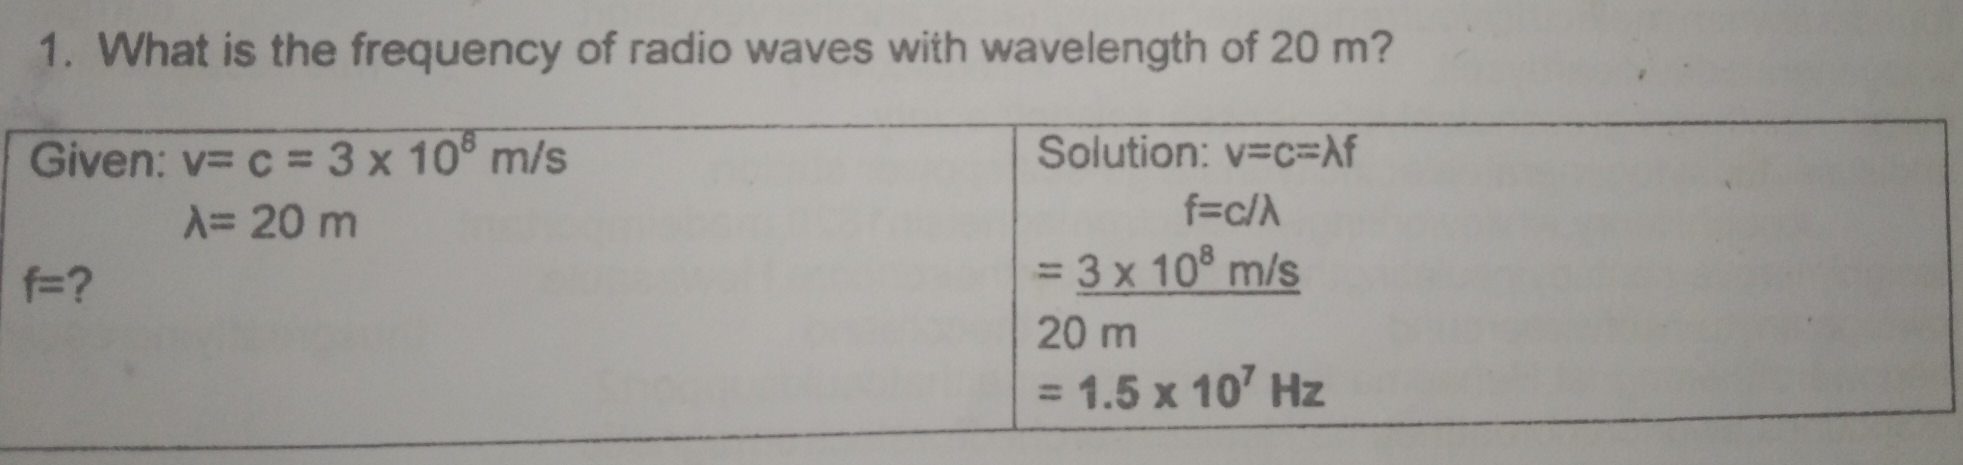 1. What is the frequency of radio waves with wavelength of 20 m? Given: v=c=3 * 108 m/s Solution: v=c=lambda f lambda =20 m f=c/lambda f= =underline 3 * 108 m/s 20 m =1.5 * 107 Hz